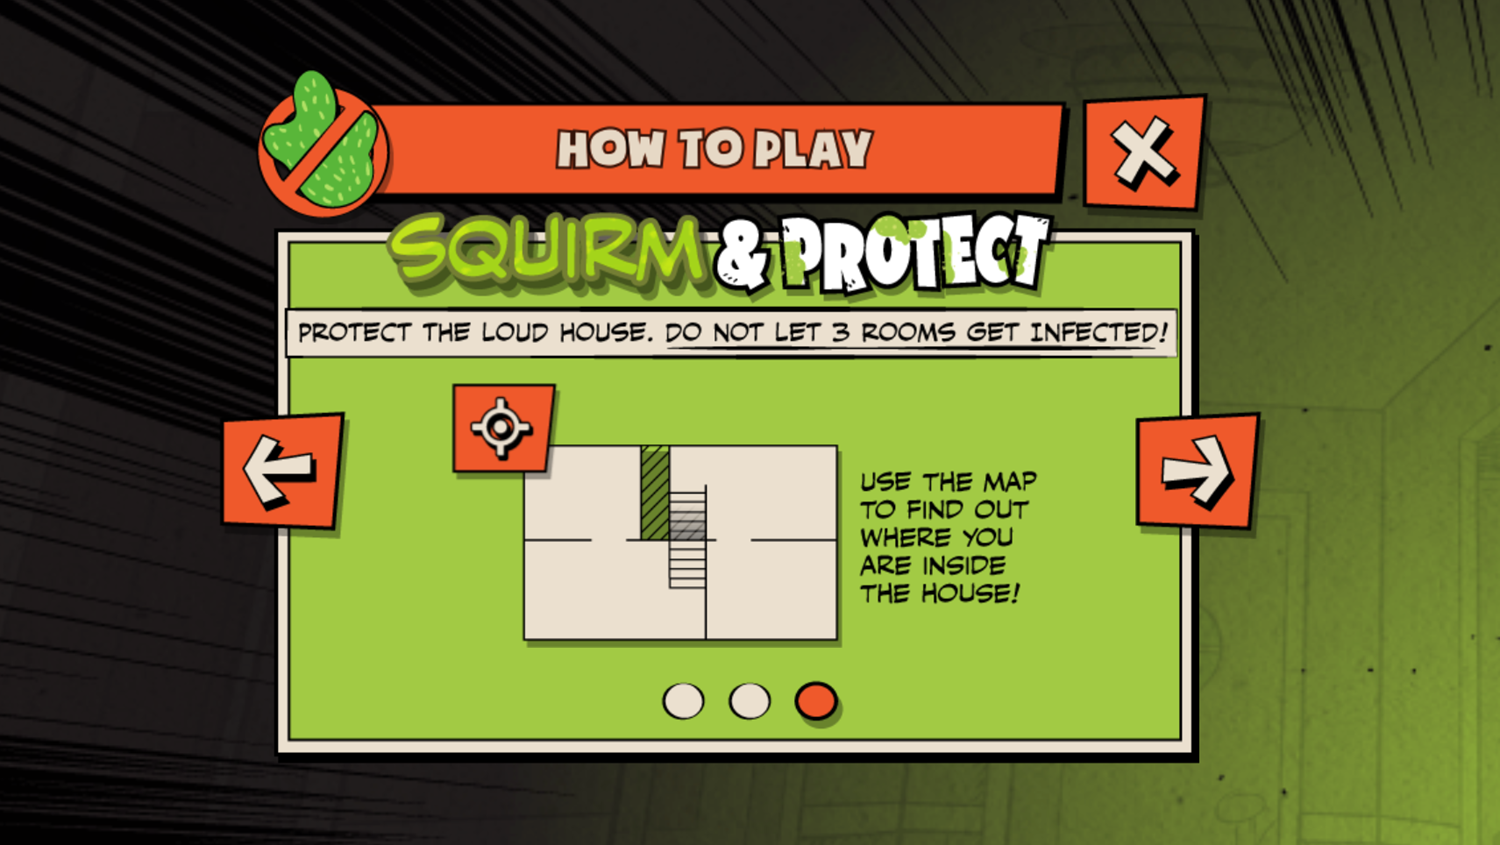 Loud House Germ Squirmish Game Squirm and Protect Play Tips Screenshot.